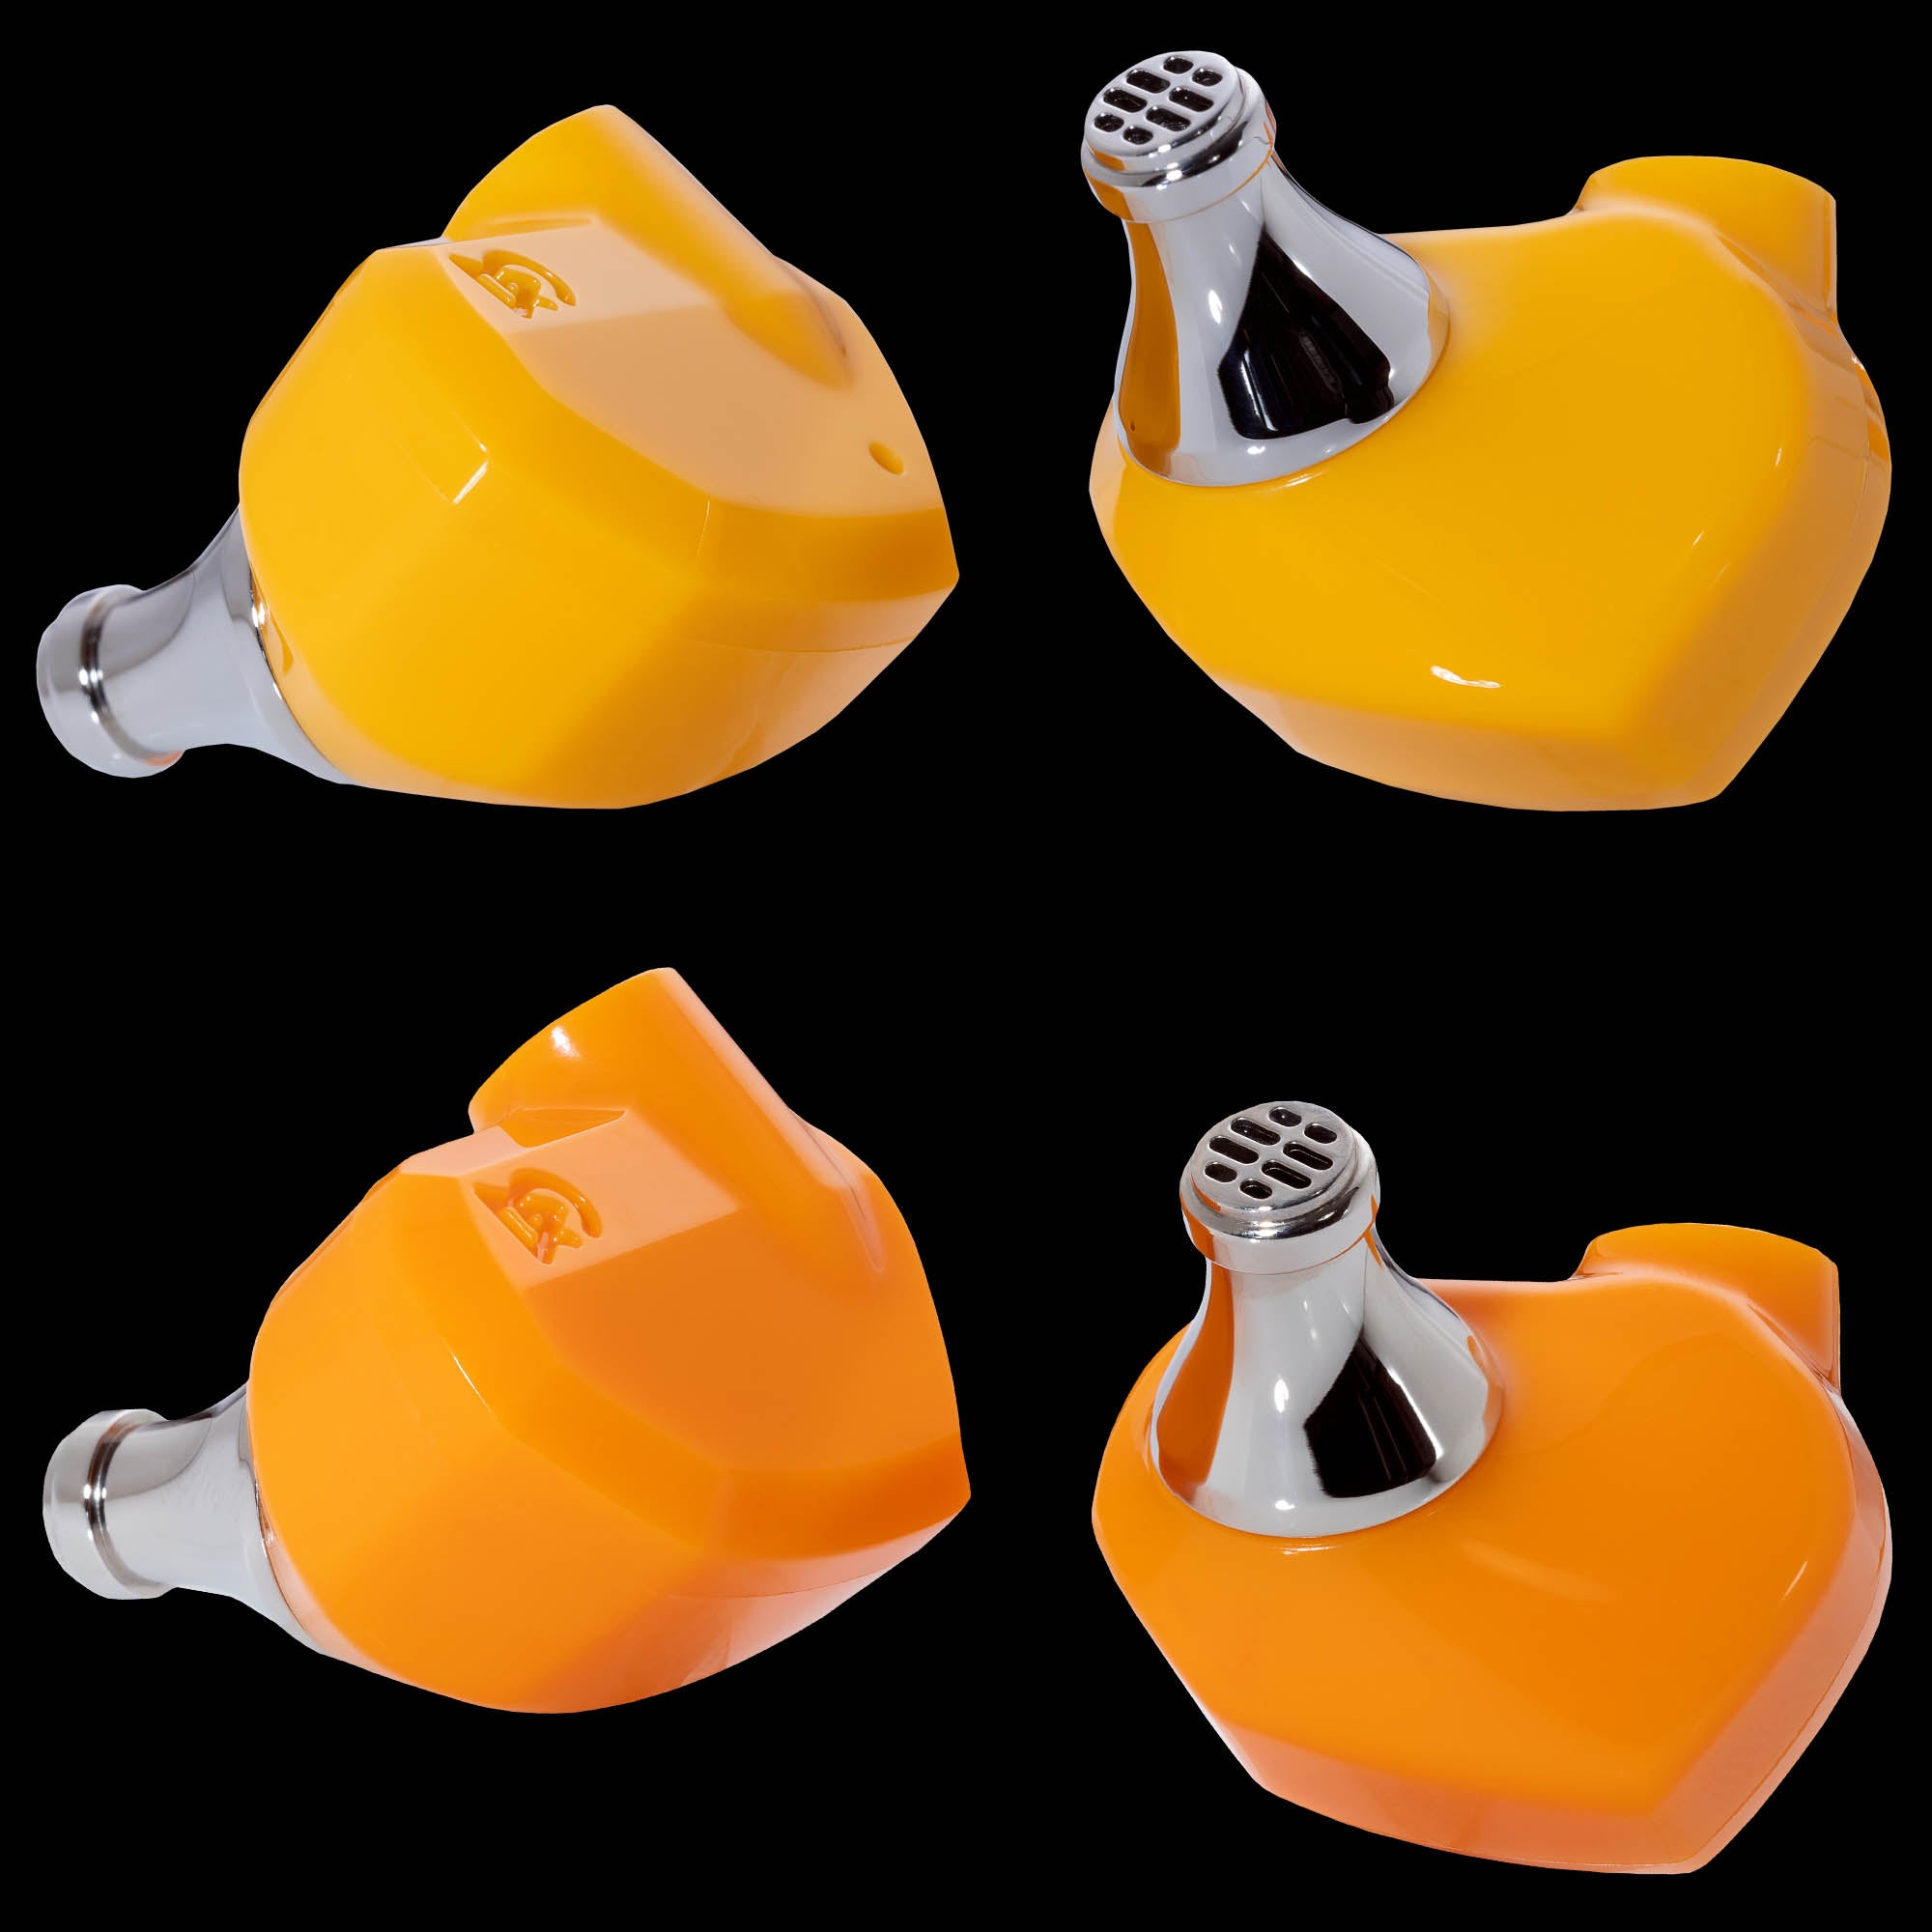 Campfire Audio Launches Two New Entry Level IEMs!